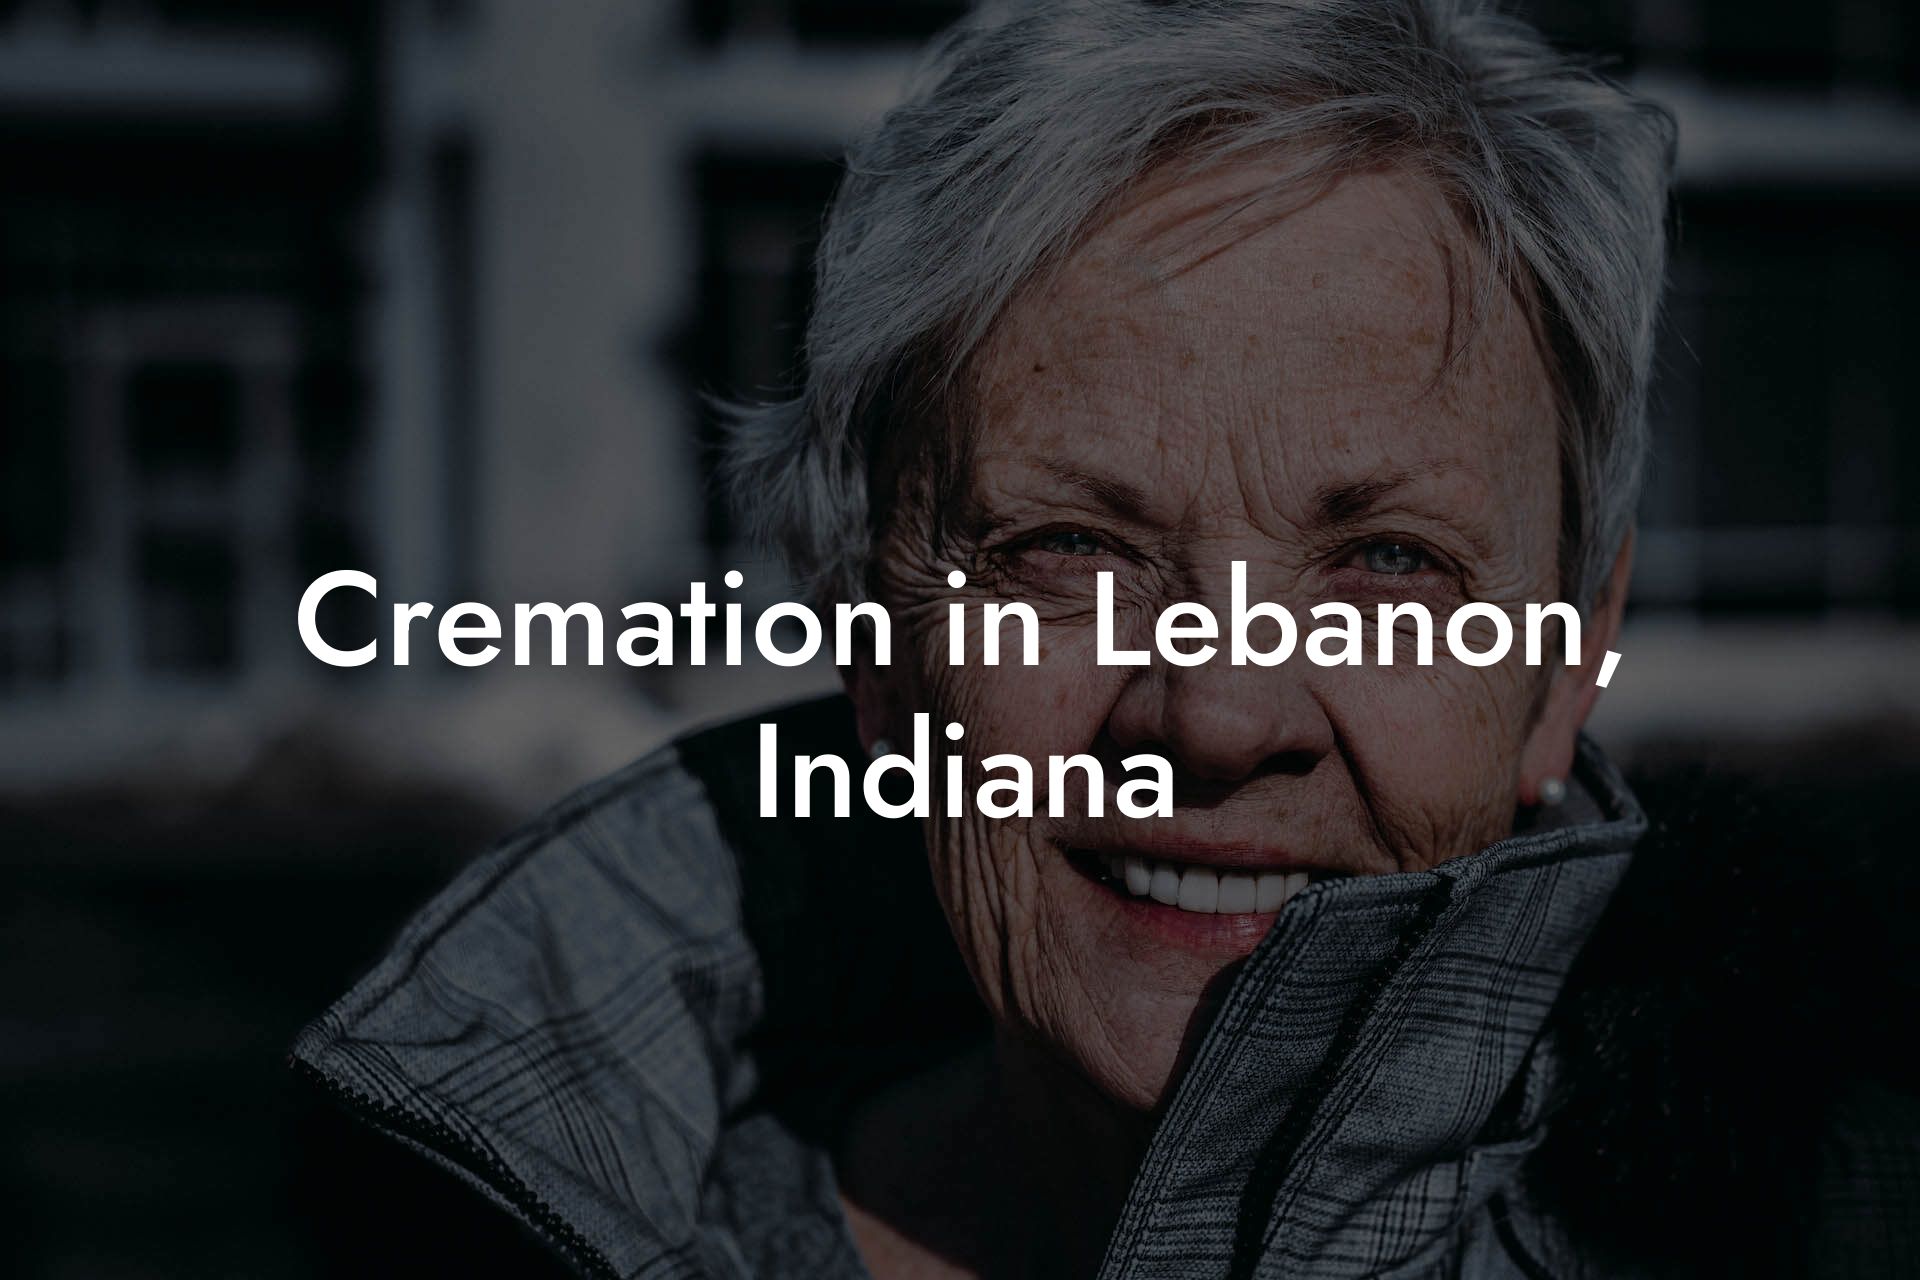 Cremation in Lebanon, Indiana